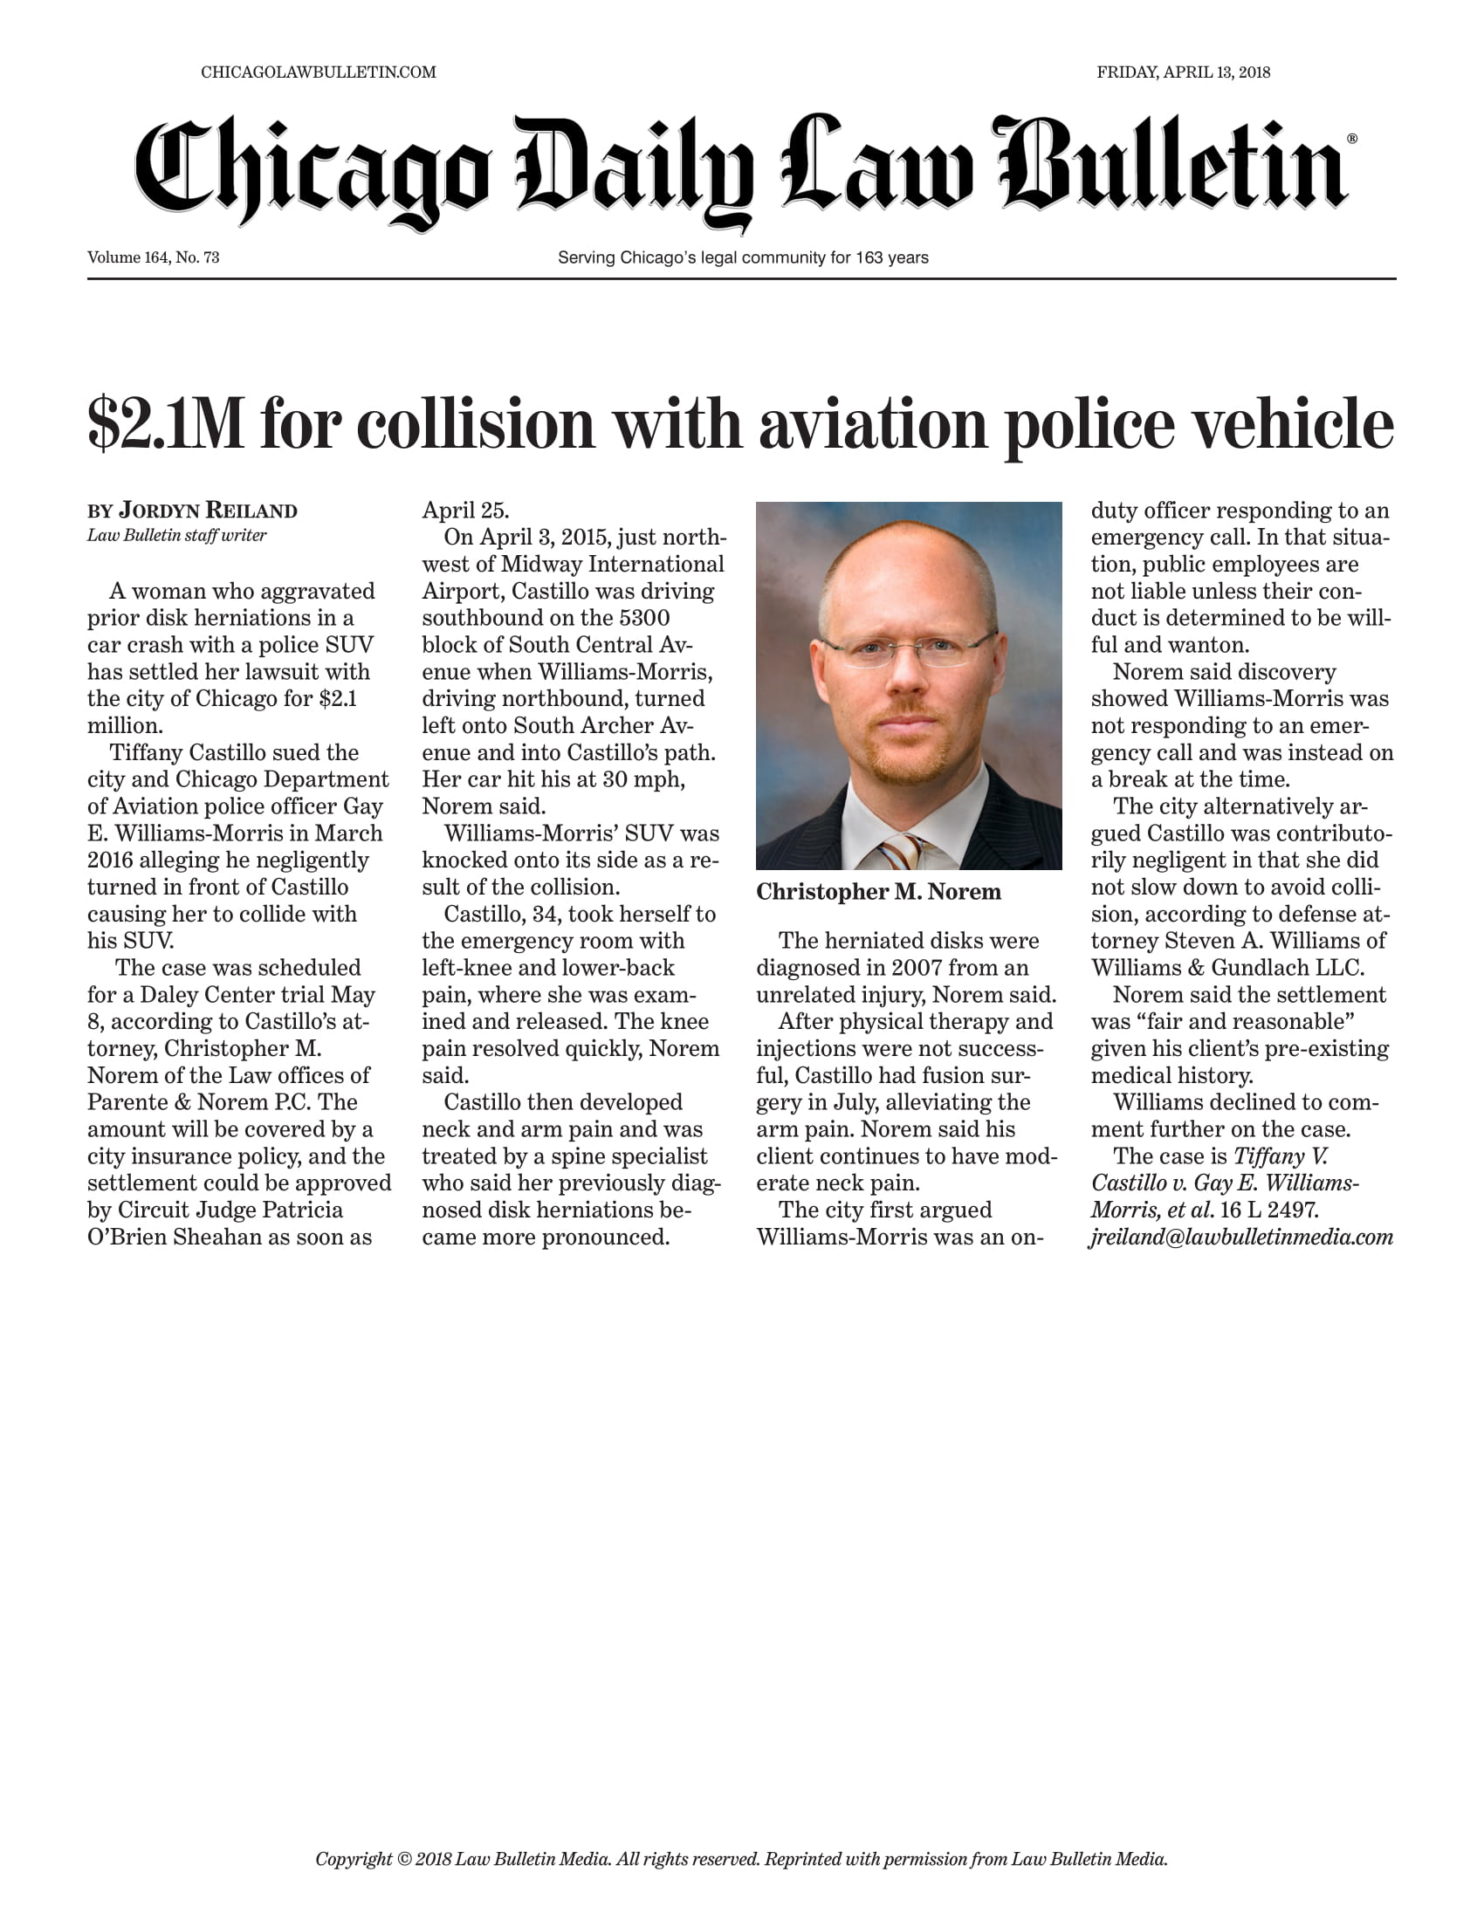 $2.1M for collision with aviation police vehicle